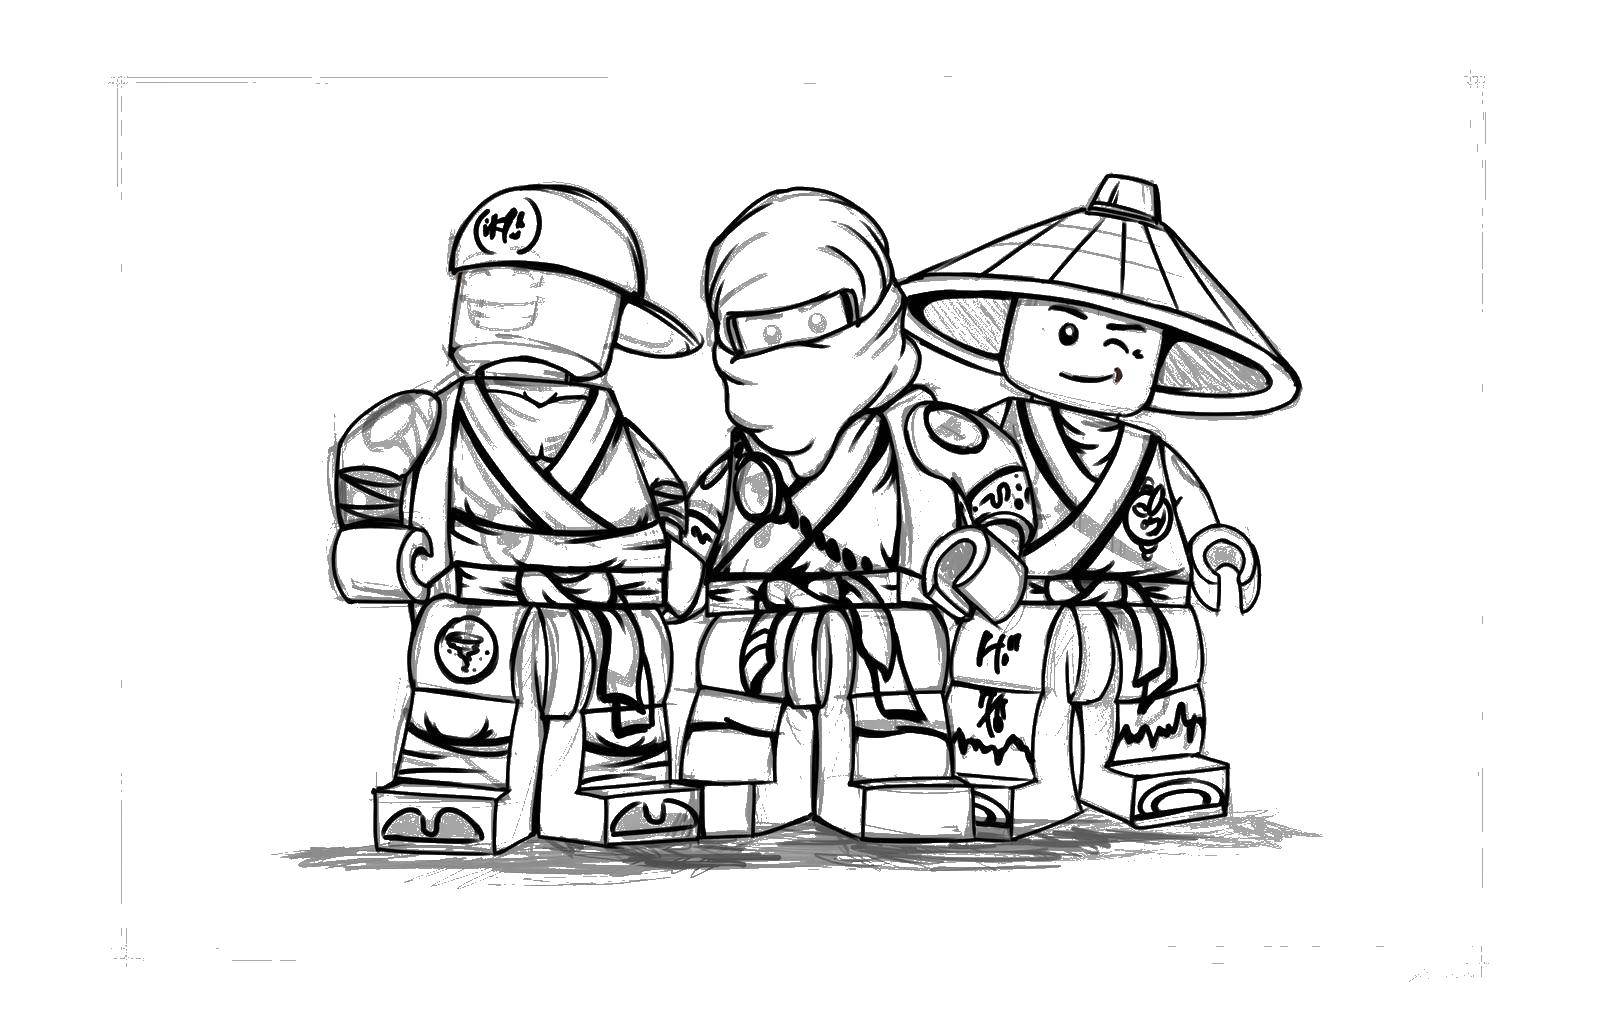 Coloring LEGO warriors. Category LEGO. Tags:  LEGO, warrior.